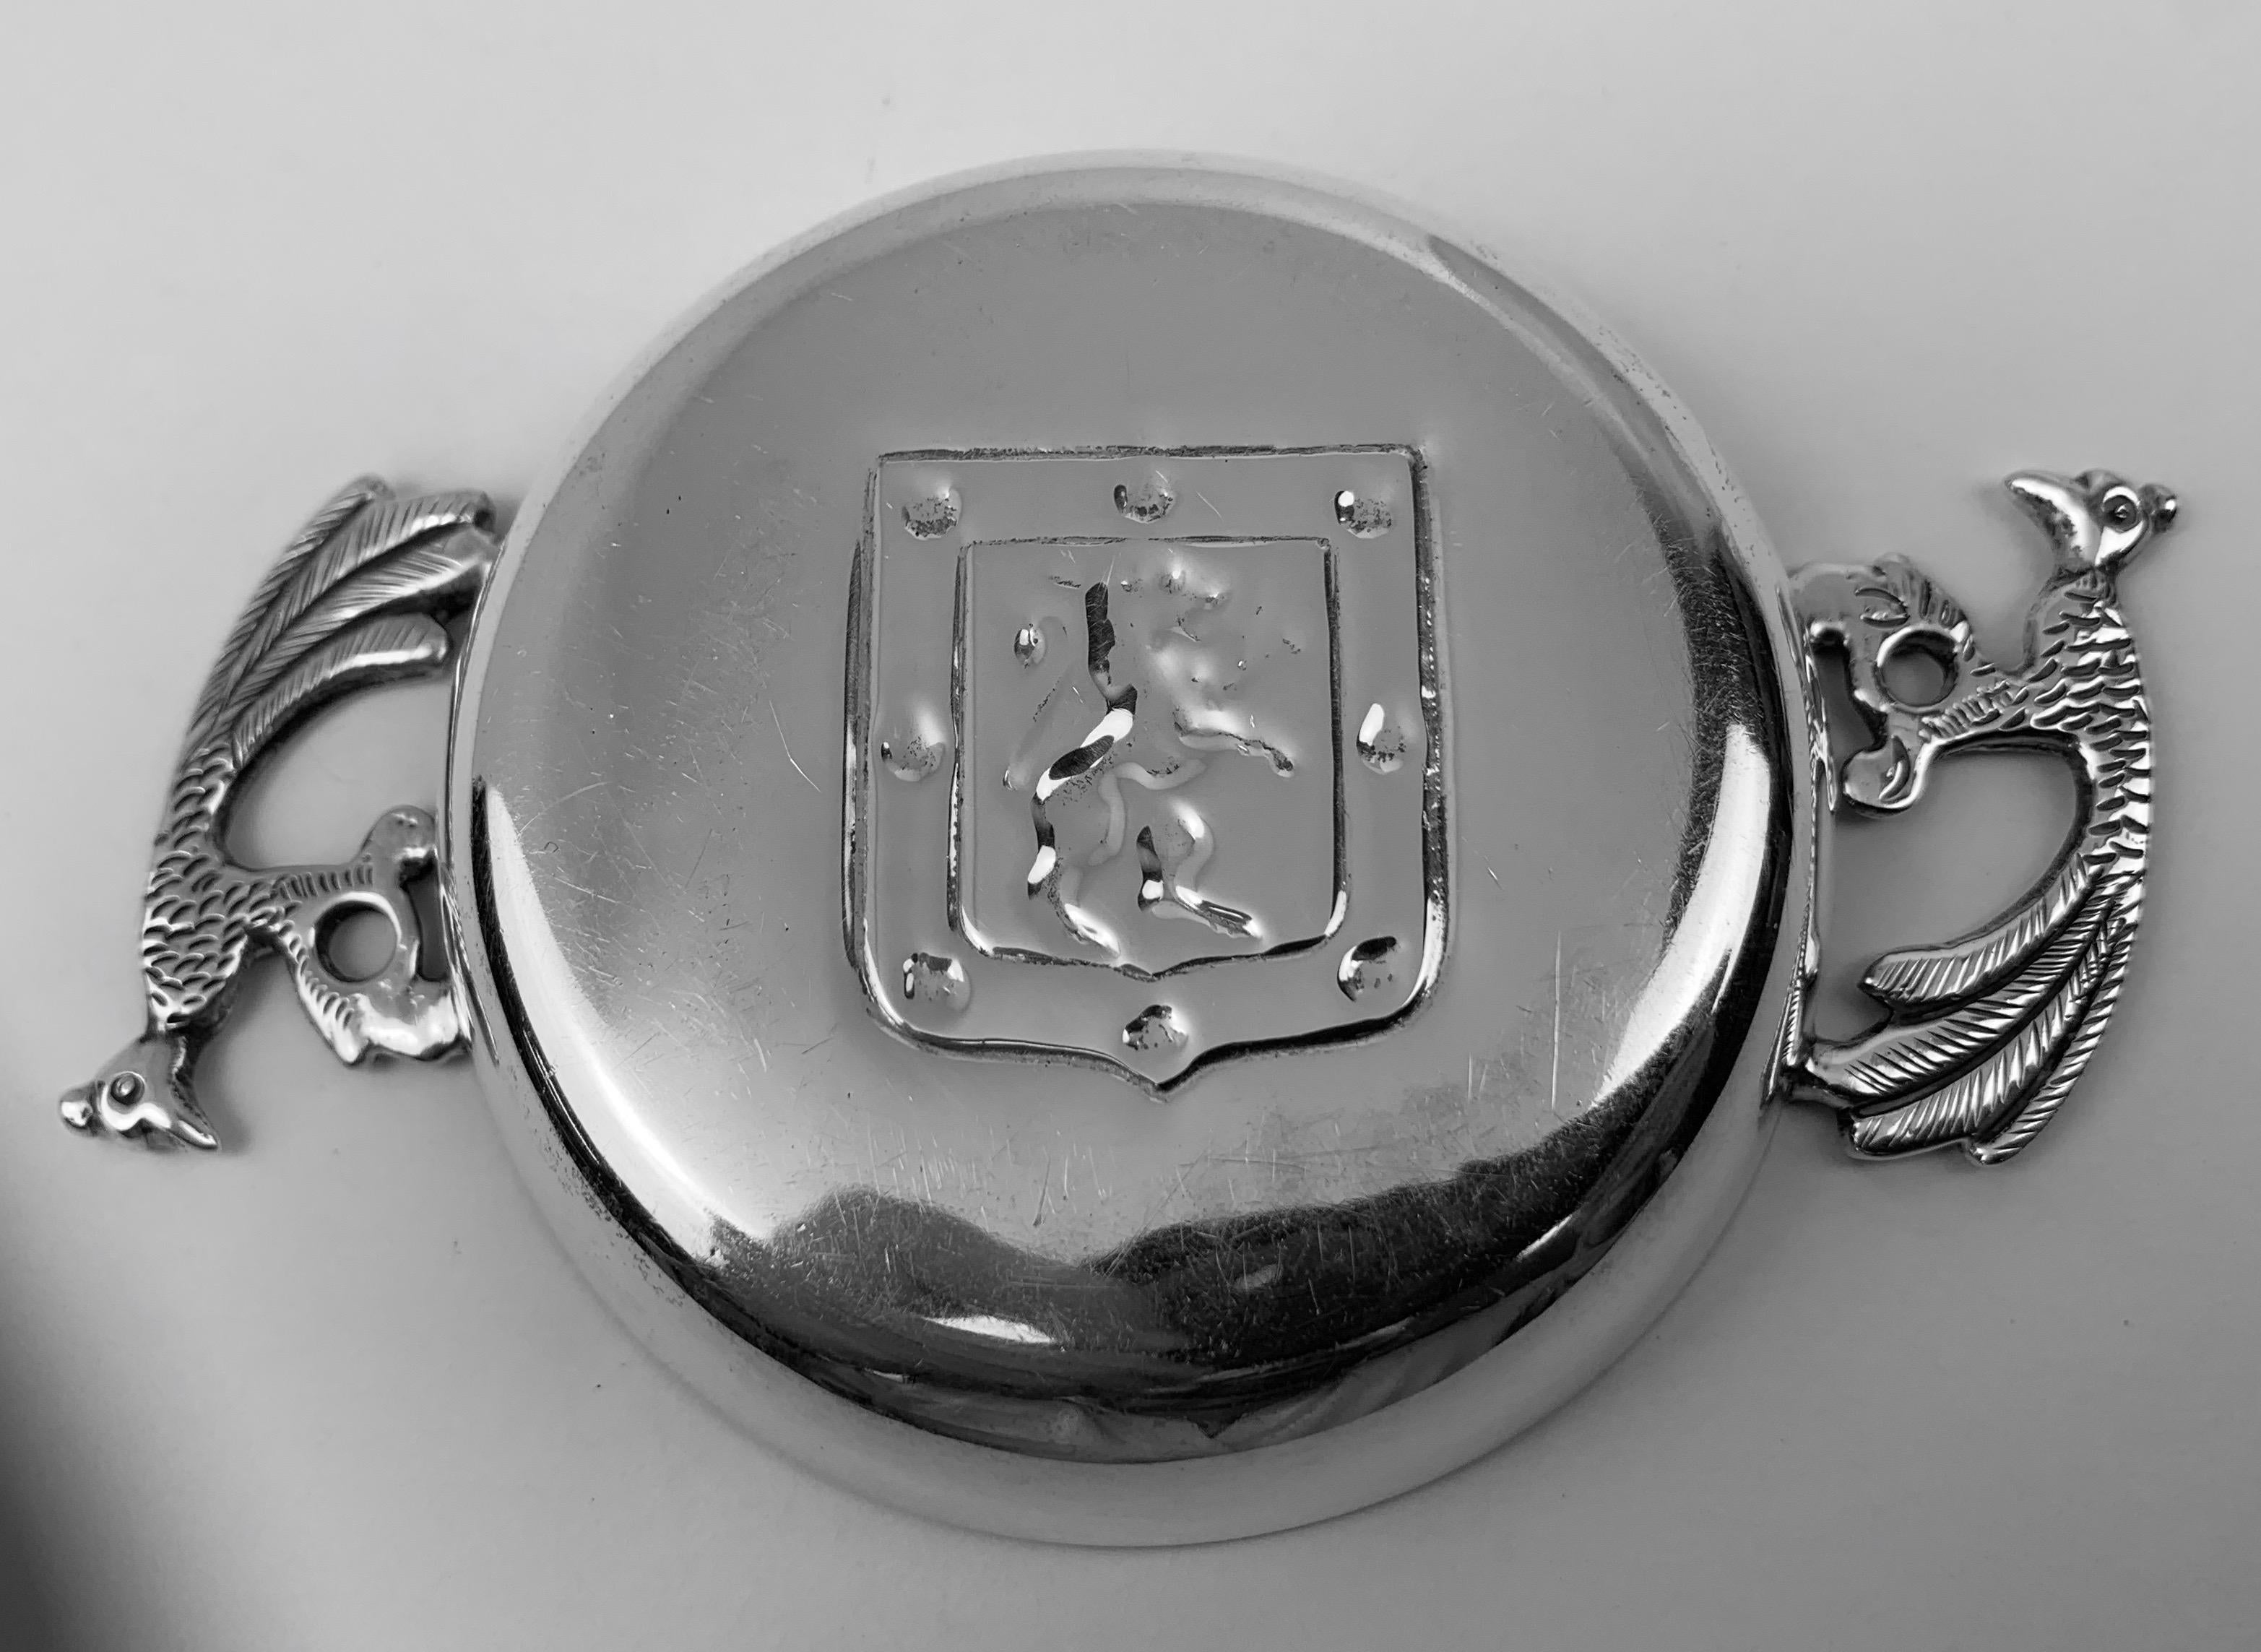 Vintage silver two handled tastevin. The handles are exotic birds and in the center of the tastevin there is a shield with a rampant lion.
Marked on the side .900 (silver) Chile. The perfect gift for a budding sommelier.